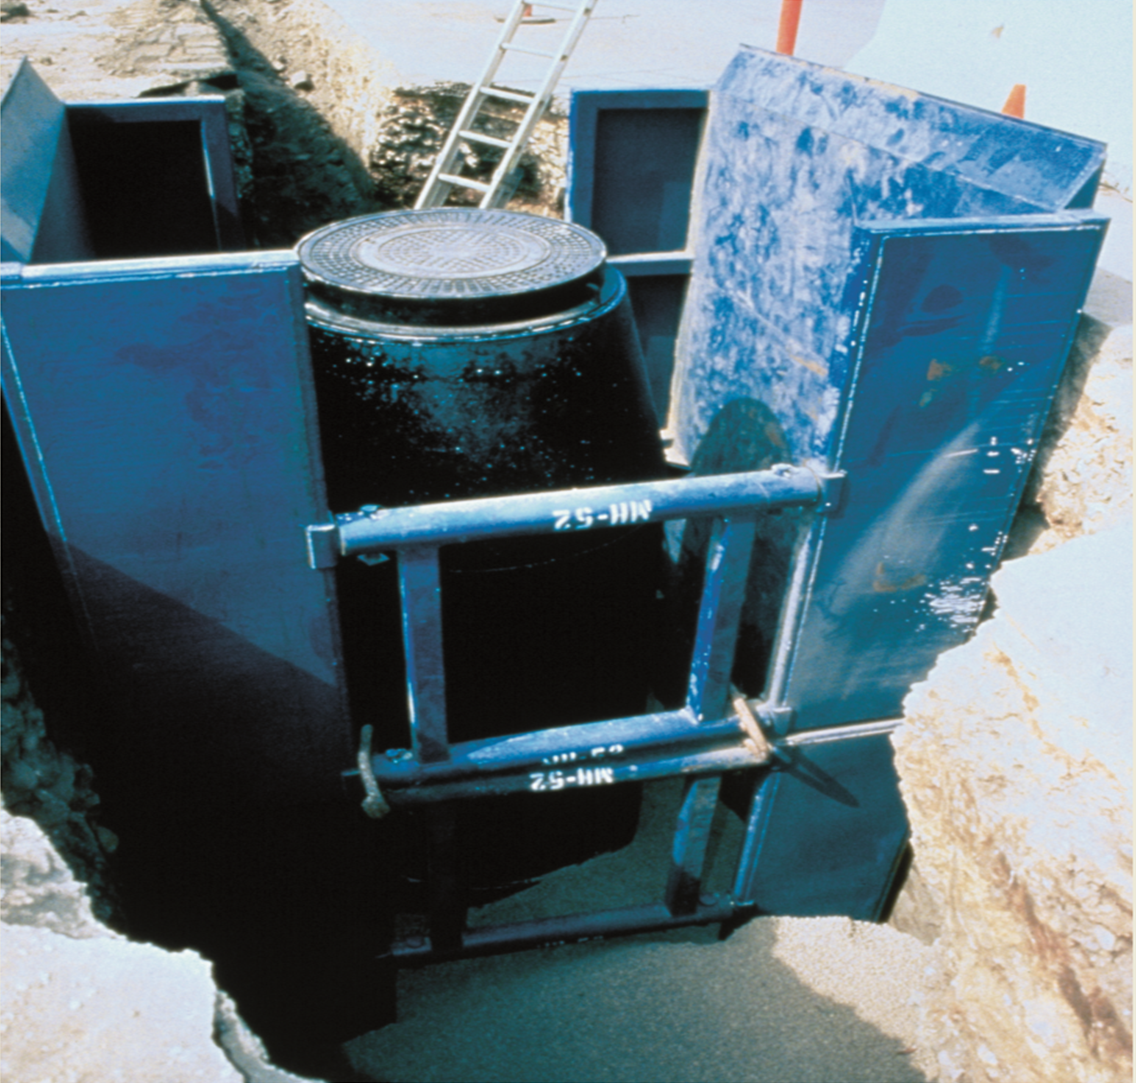 blue manhole shield in use at worksite